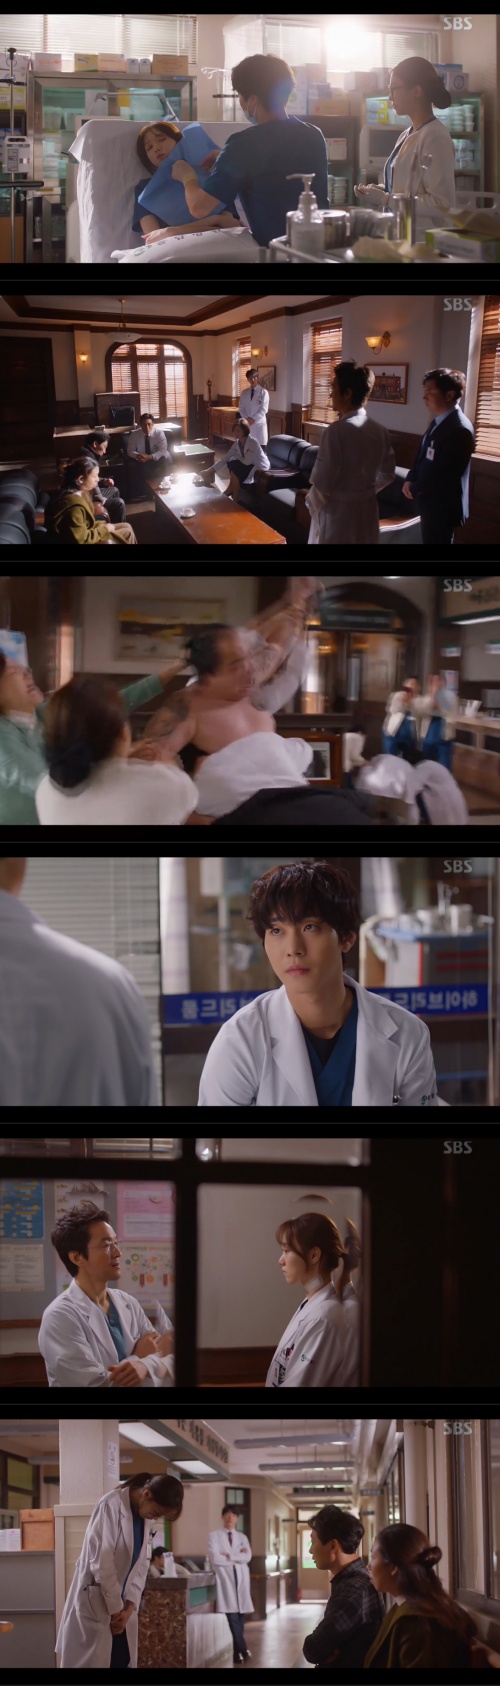 Romantic Doctor Kim Sabu 2 Han Suk-kyu gave Kim Joo-heon a vicious circle of domestic violence.In SBS Wolhwa Drama Romantic Doctor Kim Sabu 2 broadcast on the 27th, Cha Eun-jae (Lee Sung-kyung) received fire notification from Park Min-guk (Kim Joo-heon).Then, during the confrontation between Han Suk-kyu and Park Min-guk, her husband, who was exercising a domestic violence, died.On this day, Oh Myung-sim (Jin Kyung) heard what Yoon A-reum (Soo Ju-yeon) and Park Eun-tak (Kim Min-jae) said, and found out that Yeo Un-yeong (Kim Hong-pa) is suffering from lung cancer.Since then, he has been unable to hide his tears by talking to Kim Sabu.When asked what he would do in the future, Kim said, No matter what we do in the future, we will have to choose between them.Whether we persuade them over there or close the door to the stone wall hospital, he said.Cha Eun-jae was injured in the neck in a cutter knife wielded by his wife who was undergoing a domestic violence, and Seo Woo Jin (Ahn Hyo-seop) went on a suture.Kim Sabu and Jang Gi-tae (Im Won-hee), who came to see this, confirmed the condition of Cha Eun-jae, and Kim Sabu was relieved in a serious situation. Kim Sabu, who had spoken with Jang Gi-tae, rushed to the directors office.In the directors office, her husband and wife, who injured Cha Eun-jae, were with Park Min-guk. Park Min-guk, who was looking at the incident, said, What would you do wrong if the child was sick?Is not we in the hospital? Kim said, You have been violent and you have hurt our Physician.Do not pretend to be an underdog, pretend not to be an underdog. My husband said, My wife made a mistake to protect me. Kim asked her if she agreed with her.At that time, Shim Hye-jin (Park Hyo-joo) asked to check the CCTV, and there was a scene in which Cha Eun-jae roughed her husband.After confirming the CCTV, Cha Eun-jae explained, My husband was the first to wield violence against his wife. Yang Ho-joon (Ko Sang-ho) said, Where is such a scene coming from?Is there no evidence? he said sarcastically.Park Min-guk suggested Kim to quietly move on to the case. When Kim continued to side with Cha Eun-jae, Park Min-guk said, If you do not want to play the role of surgeon, you can put it out.I apologize and quietly do not want to talk or will you give me the place? At the same time, Ushijima the Loan Shark vendor came to Seo Woo Jin.He came into the hospital and said, Did not you borrow my money and pay it back?He then broke both the top and bottom, and screamed whales.When Seo Woo Jin told him to stop, Ushijima the Loan Shark vendor lay down on his desk, saying, Then write a memorandum, I can not do anything before.Ushijima the Loan Shark contractor and Seo Woo Jins Mumbasic Fighting took place, and Bae Moon-jung (Shin Dong-wook) blocked Seo Woo Jin.Ushijima the Loan Shark vendor provoked Is not it like shit you do? And Ushijima the Loan Shark vendor punched Bae Mun-jung.Starting with this, Doldam Hospital became a mess.Kim Sabu, who has been following, said that he would treat the gangster and sue him. Do you have to sue me?Did not you hit our doctor? He said, Is not it a leech that sucks interest to people who are desperate for money?Kim Sabu, who treated the hands of Seo Woo Jin, asked, How much money is owed? And Seo Woo Jin said, I have never lived while talking about me.When Kim Sabu tried to move on, Seo Woo Jin said, I knew I would take responsibility for what happened today, I could be cut off like this.Kim said, If you are cut off, what about my money. You forget to pay my money for 10 months? You can never leave until you pay it.Seo Woo Jin asked, Why are you so good to me? And Kim said, When I was always on the subject of being confused and broken.Dont think about it, just look at the patient. You can do it. Cha Eun-jae has offered an apology to her Dominican violence husband, who said: You dont have to.Why is it that a person who is being hurt by the weak who is being abused? But Cha Eun-jae did not give his opinion. Is Kim going to apologize for not being able to deal with the situation?Its easier to do it all with excuses like this and that, and if you are taken for granted, you will end up living a cheap life that is cheap no matter what you are treated. However, Cha Eun-jae bowed his head and apologized, and while he apologized, he did not disappear from his uncomfortable mood, and Cha Eun-jae, who was called to the directors office, talked with Park Min-guk.Park Min-guk started the question When are you going to get married? And informed the fire by asking why Cha Eun-jae is a woman and that there is surgery.Cha Eun-jae recalled Kim Sabus words and realized, I have become a cheap life even if I have been treated like that.It was then reported that a patient with terminal heart failure was being transported; the patient was an armsman who killed two people, and Park Min-guk asserted, We can never get it at our hospital.Kim said, Why do not you get a patient when the hospital room and the operating room are not full?When Kim Sabu and Park Min-guk were in a confrontation with each other, the Dominican violence husband came into the emergency room with blood spilling, and died on the way.Previously, Park Min-guk said that Dominican violence was an accidental accident, and Kim said, Smartly watch. Dominican violence is not accidental.Cha was trying to stop him, and you were supposed to have stopped the vicious cycle as the head of the hospital, but you just covered it up.Principle? Thats funny. Thats why youre so worried about your body. Cha Eun-jae found that his wife, who had been subjected to a Dominican violence in the bathroom, was crying with blood on her hands.Romantic Doctor Kim Sabu 2 is broadcast every Monday and Tuesday at 9:40 pm.Photo: SBS Romantic Doctor Kim Sabu 2 captures broadcast screen